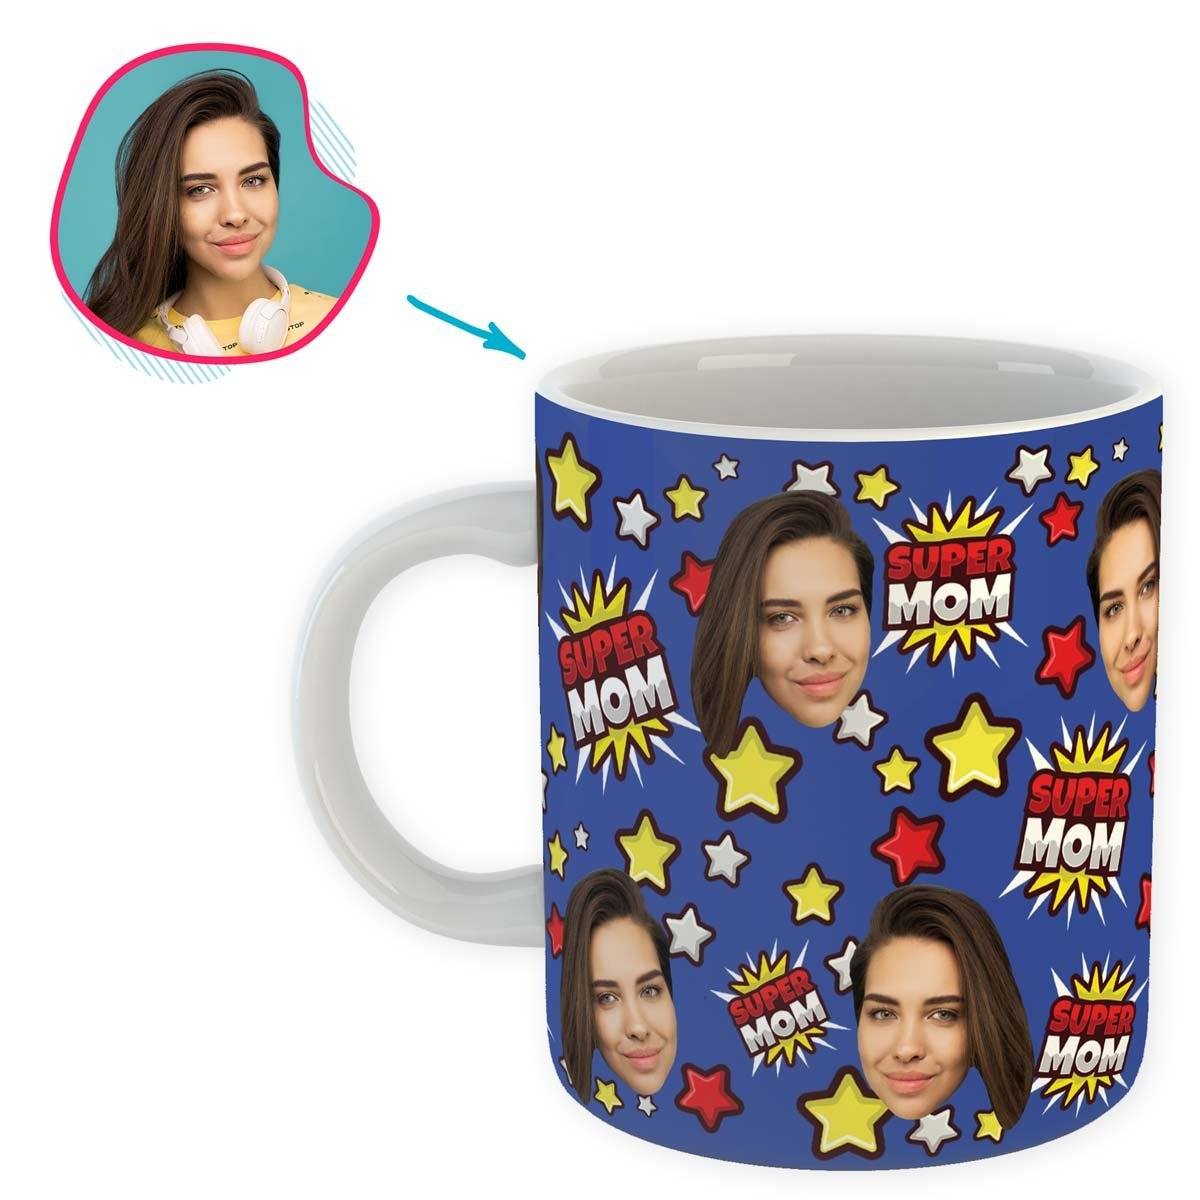 darkblue Super Mom mug personalized with photo of face printed on it